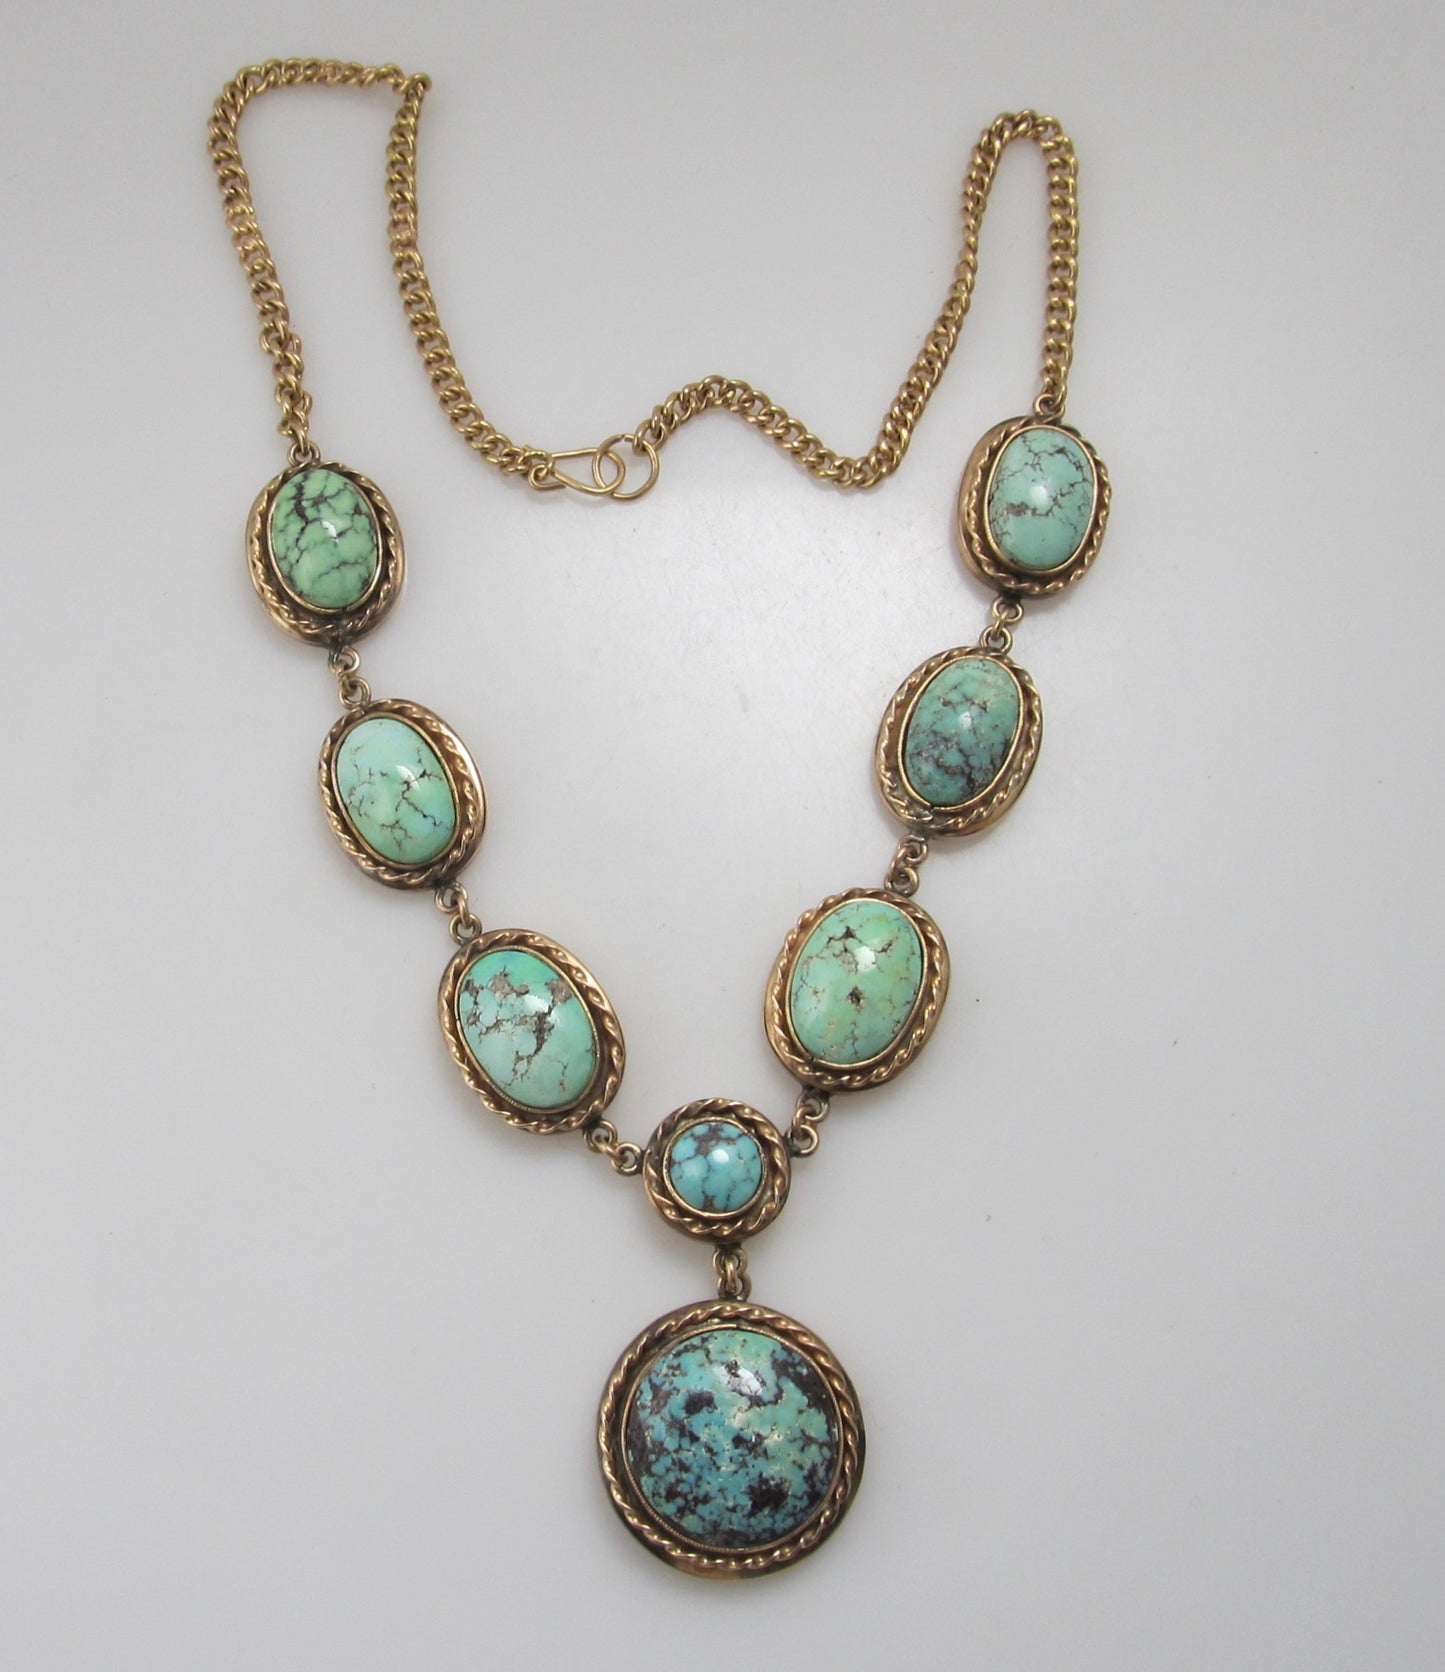 Fabulous handmade turquoise and rose gold necklace